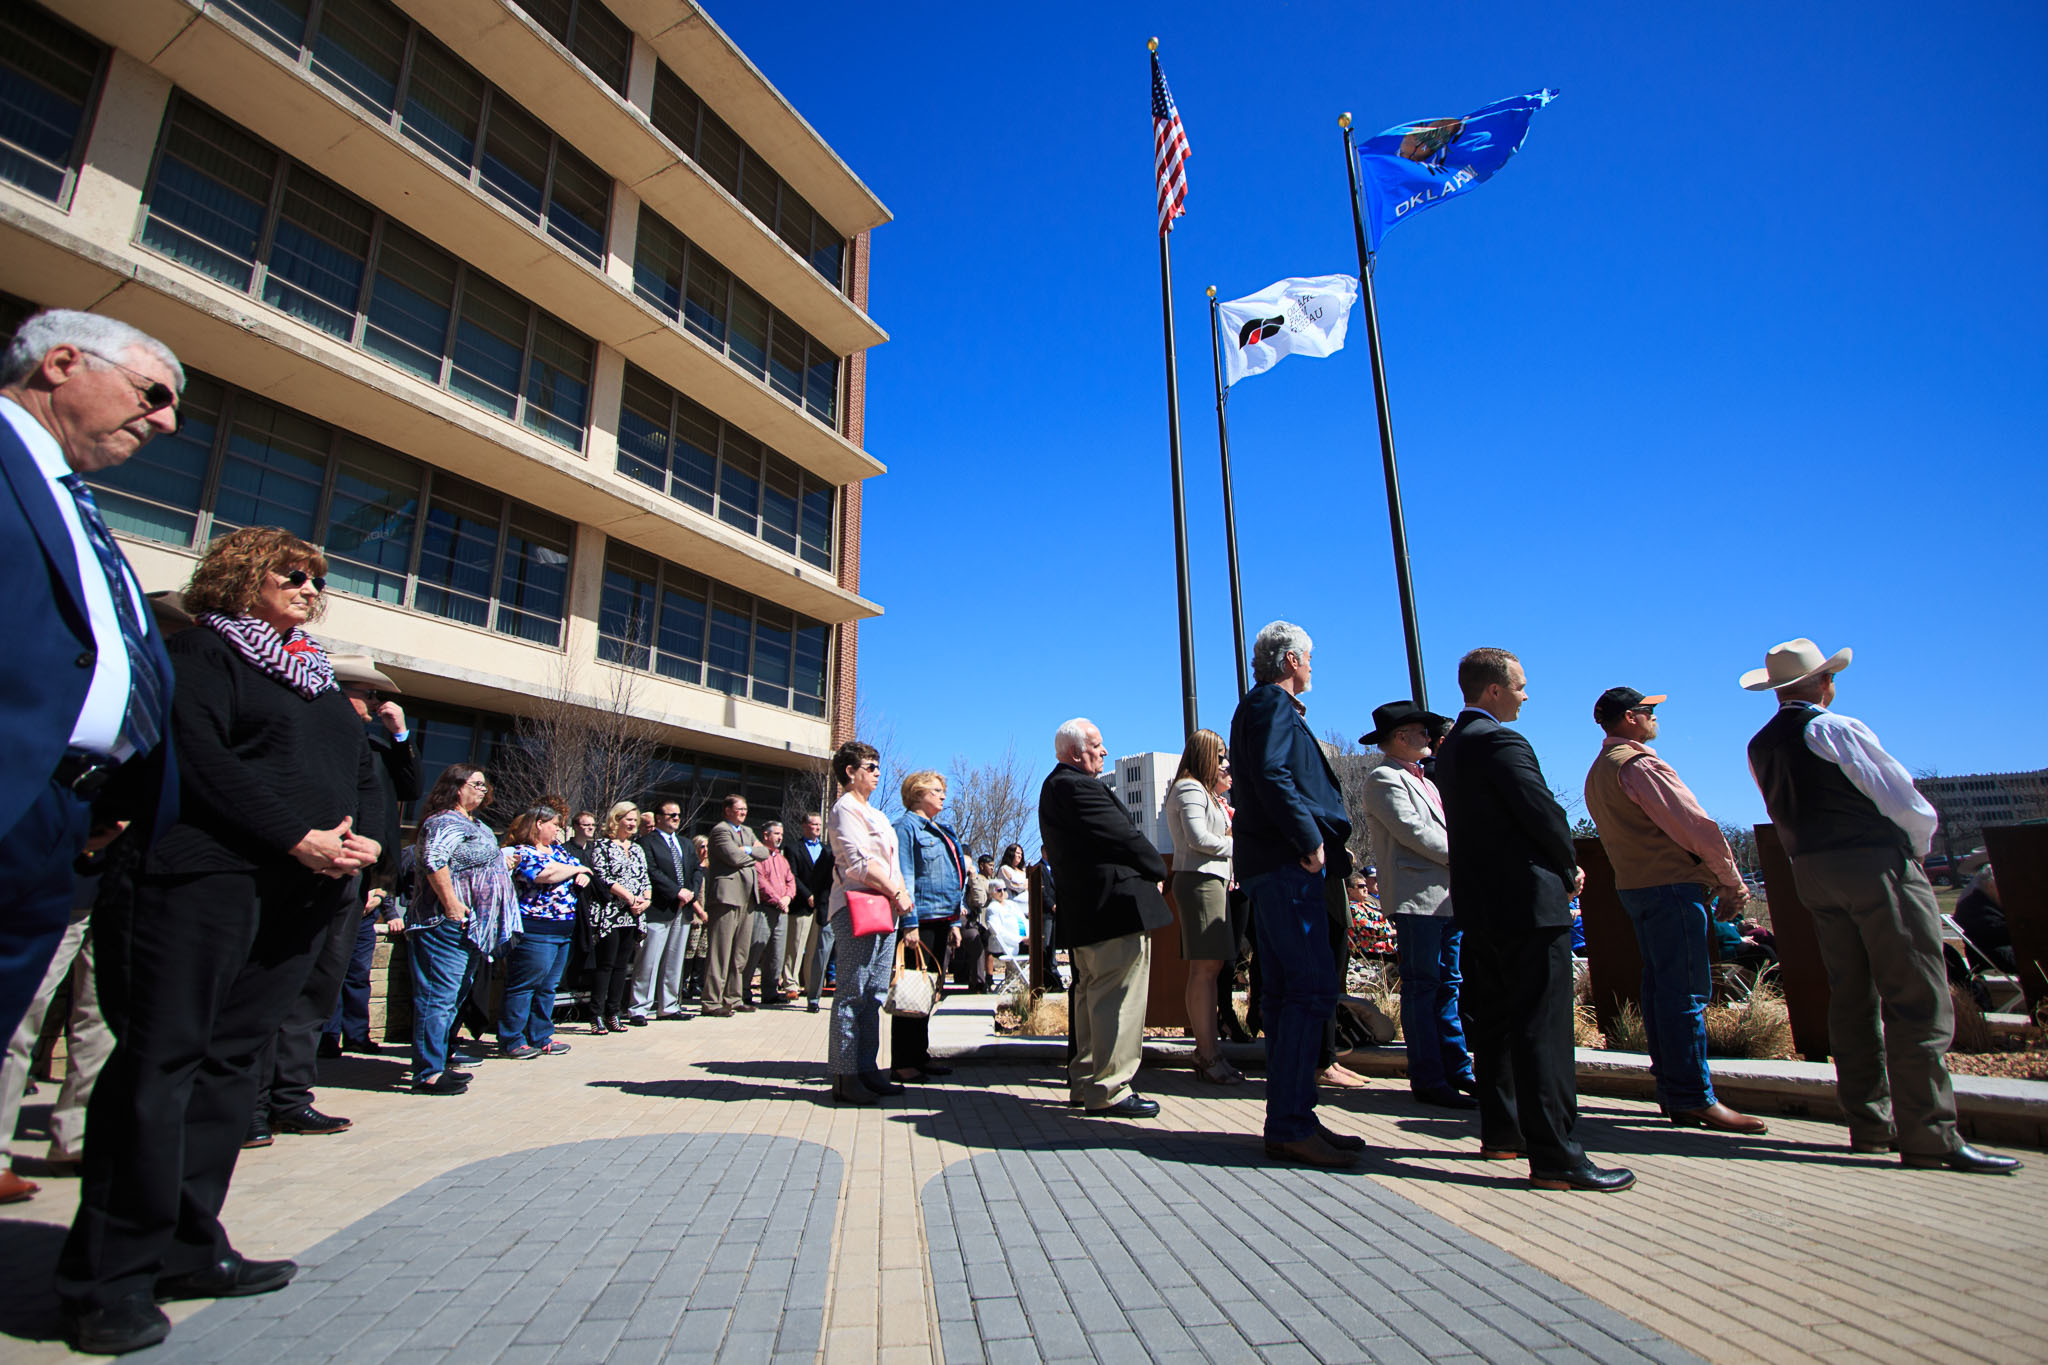 Oklahoma Farm Bureau members and guests listen to remarks during the courtyard dedication on March 7, 2017.